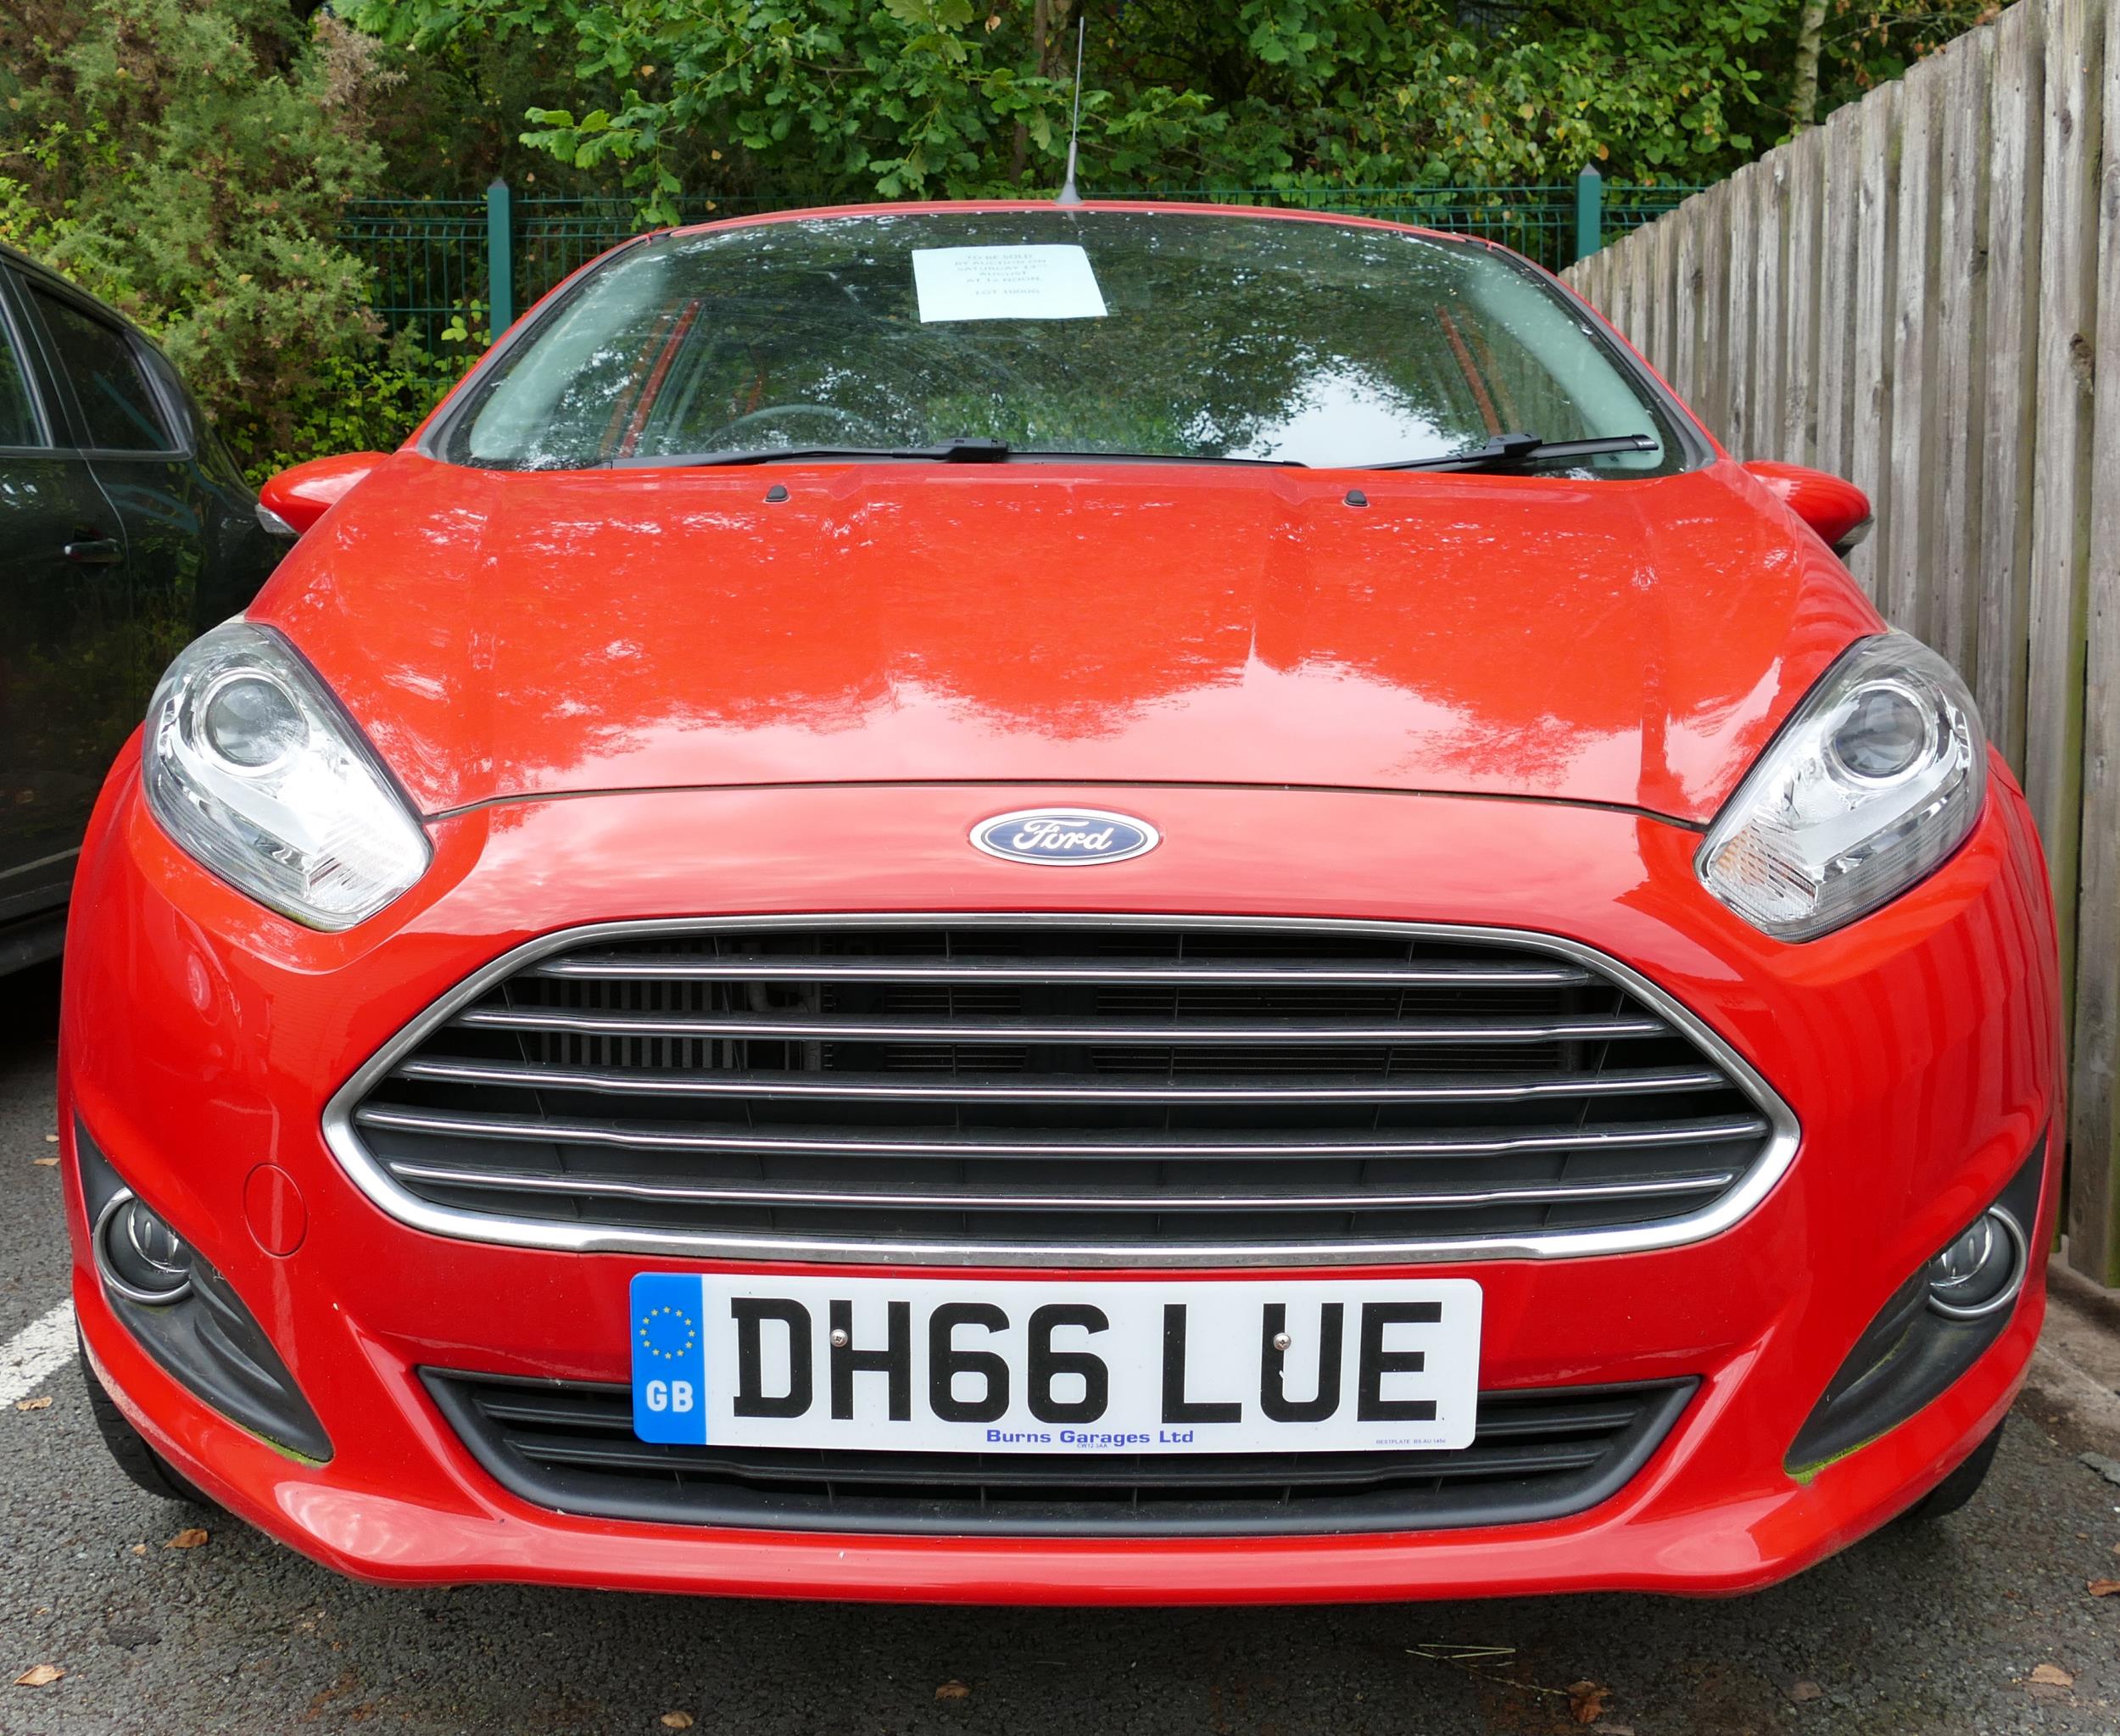 2017 Ford Fiesta Hatchback 1.0 Eco Boost Zetec 5 door car, DH66LUE, 15,736 miles. Log book - yes. - Image 2 of 9